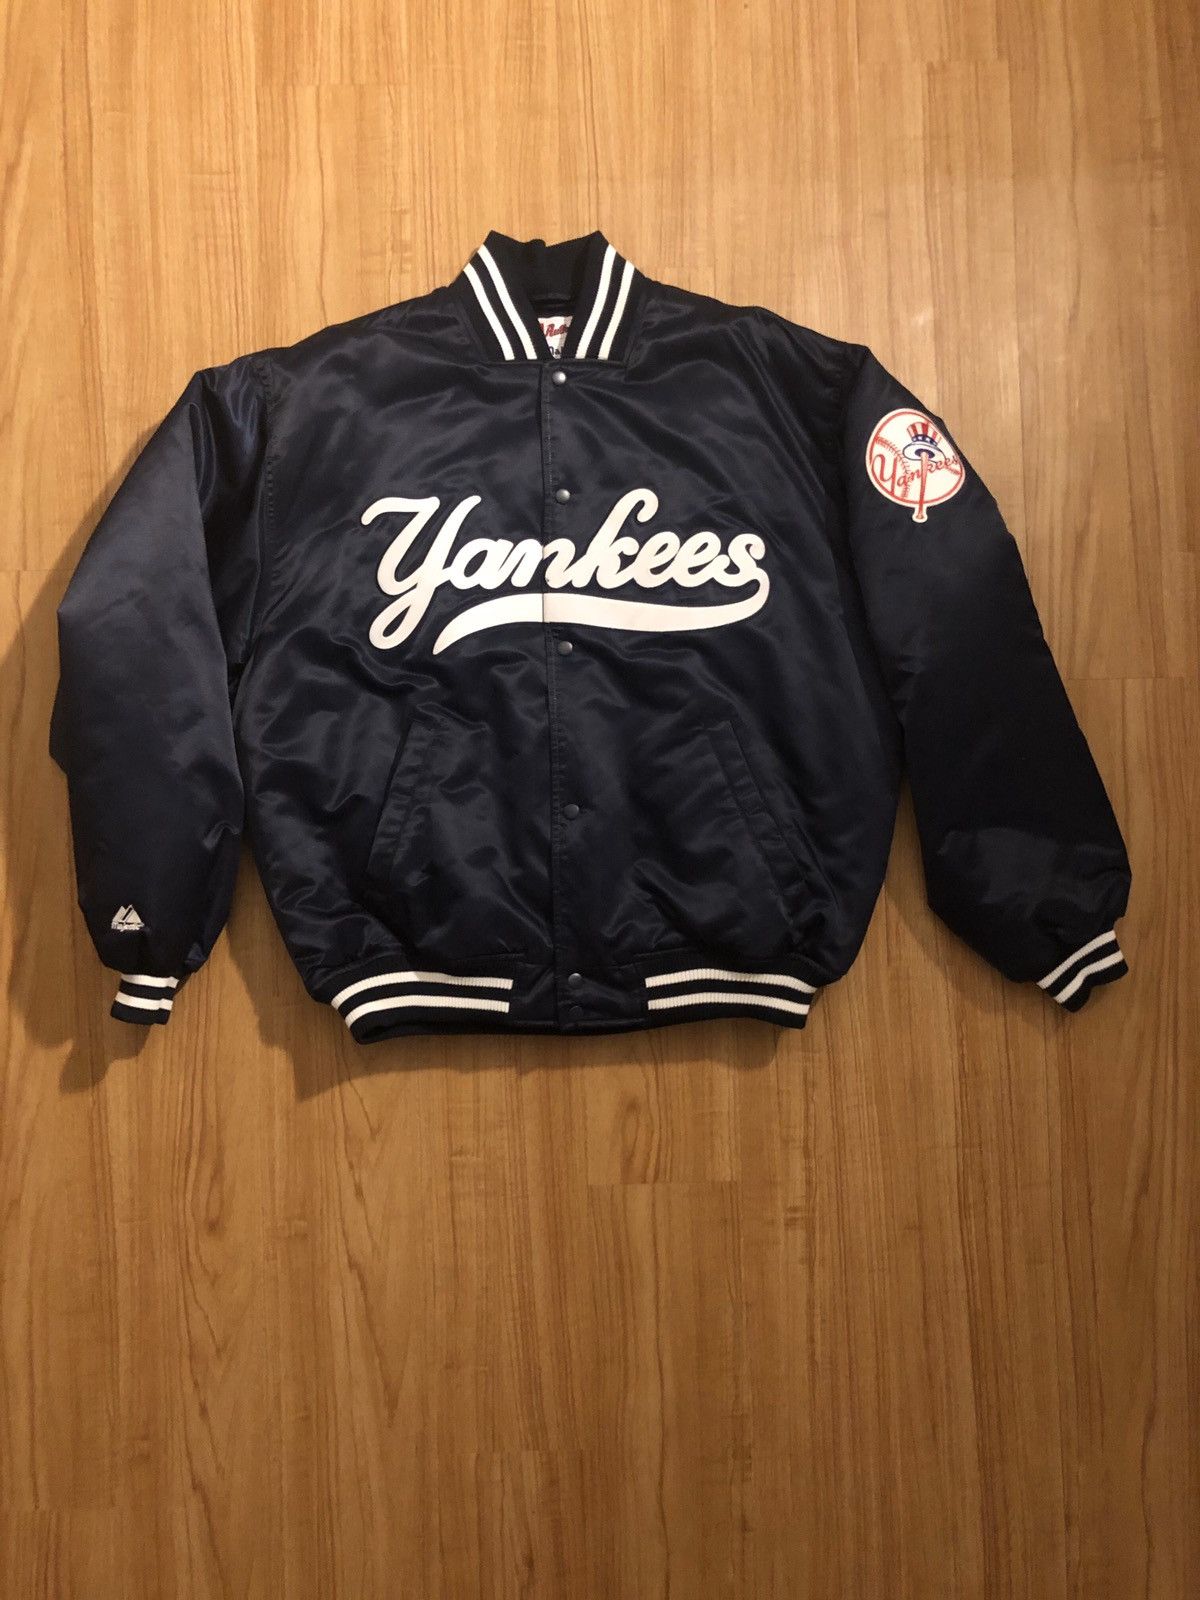 Majestic Vintage New York Yankees MLB Button Up Jacket Size US XL / EU 56 / 4 - 1 Preview